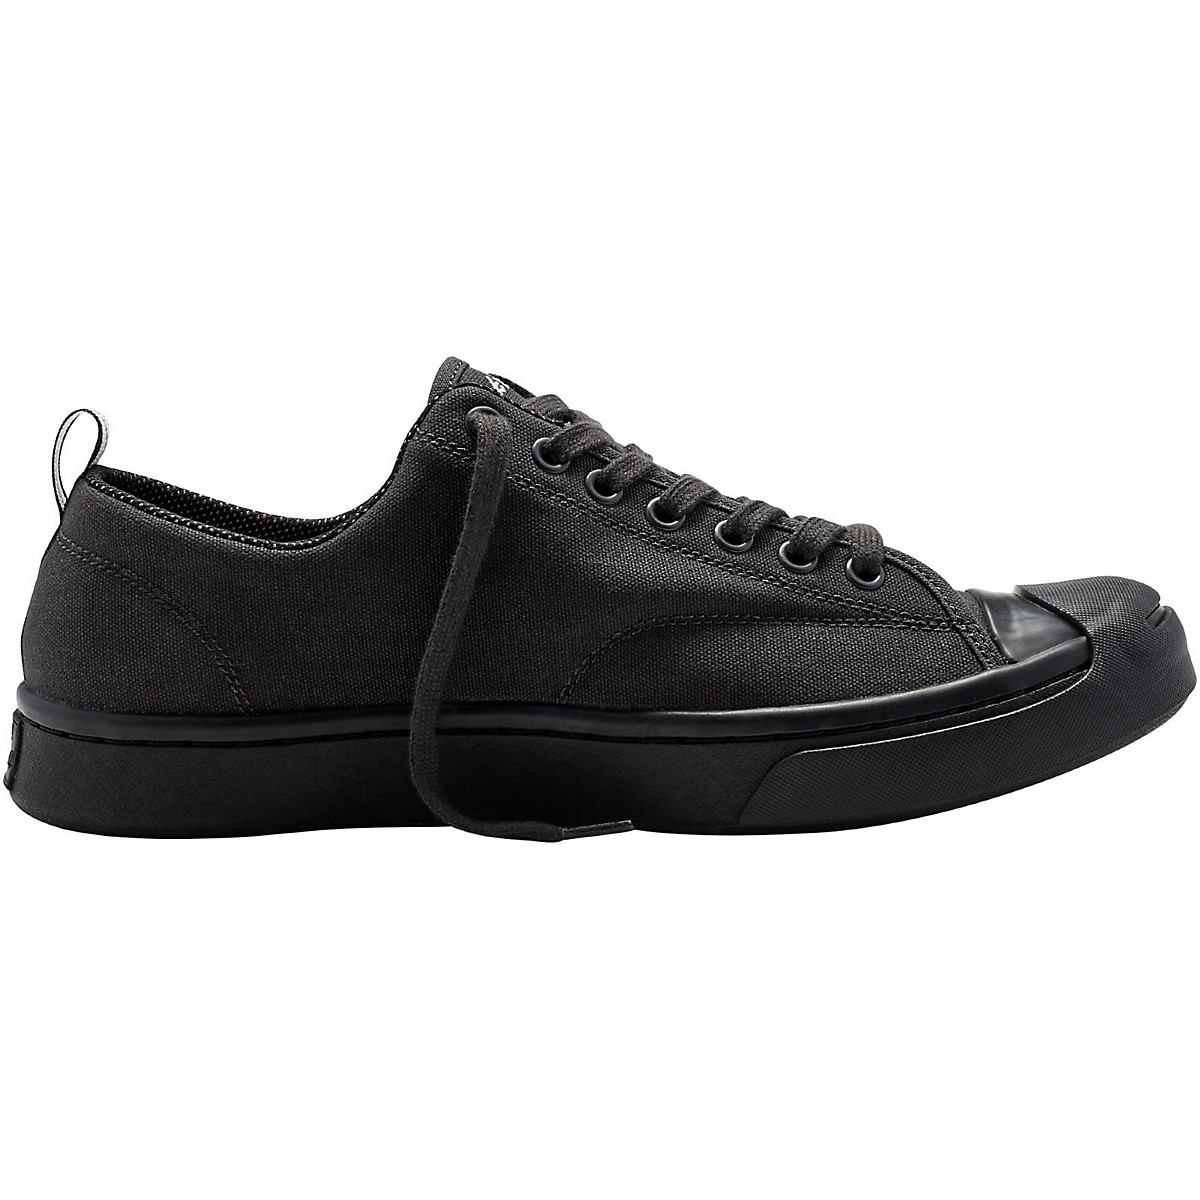 Converse Jack Purcell M-Series Oxford Dark Charcoal 10 | Guitar Center